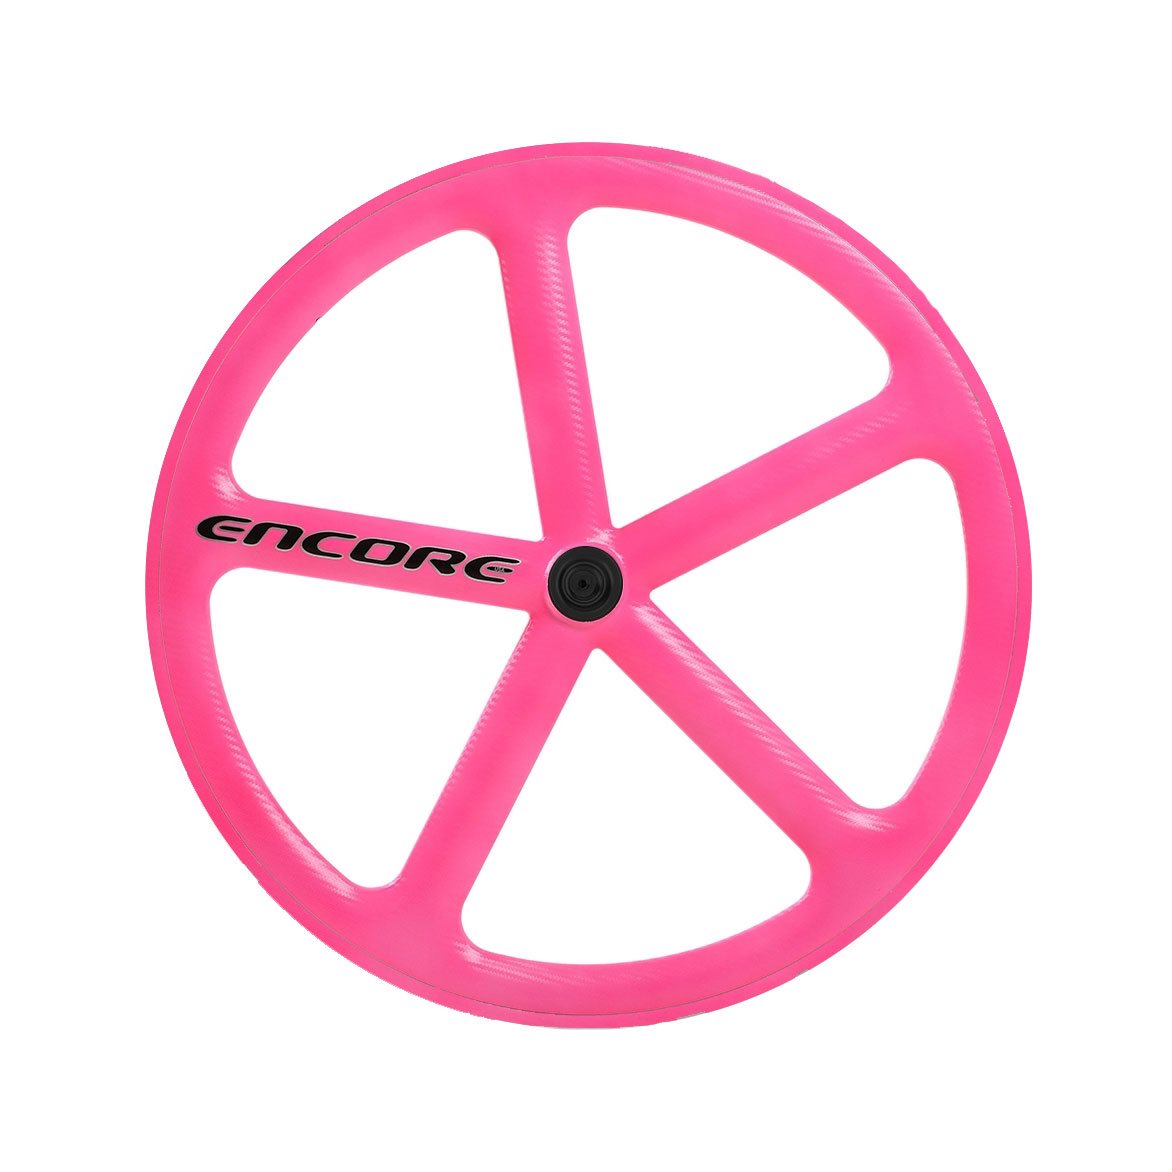 roue arrière 700c track 5 rayons carbone tissage rose fluo nmsw